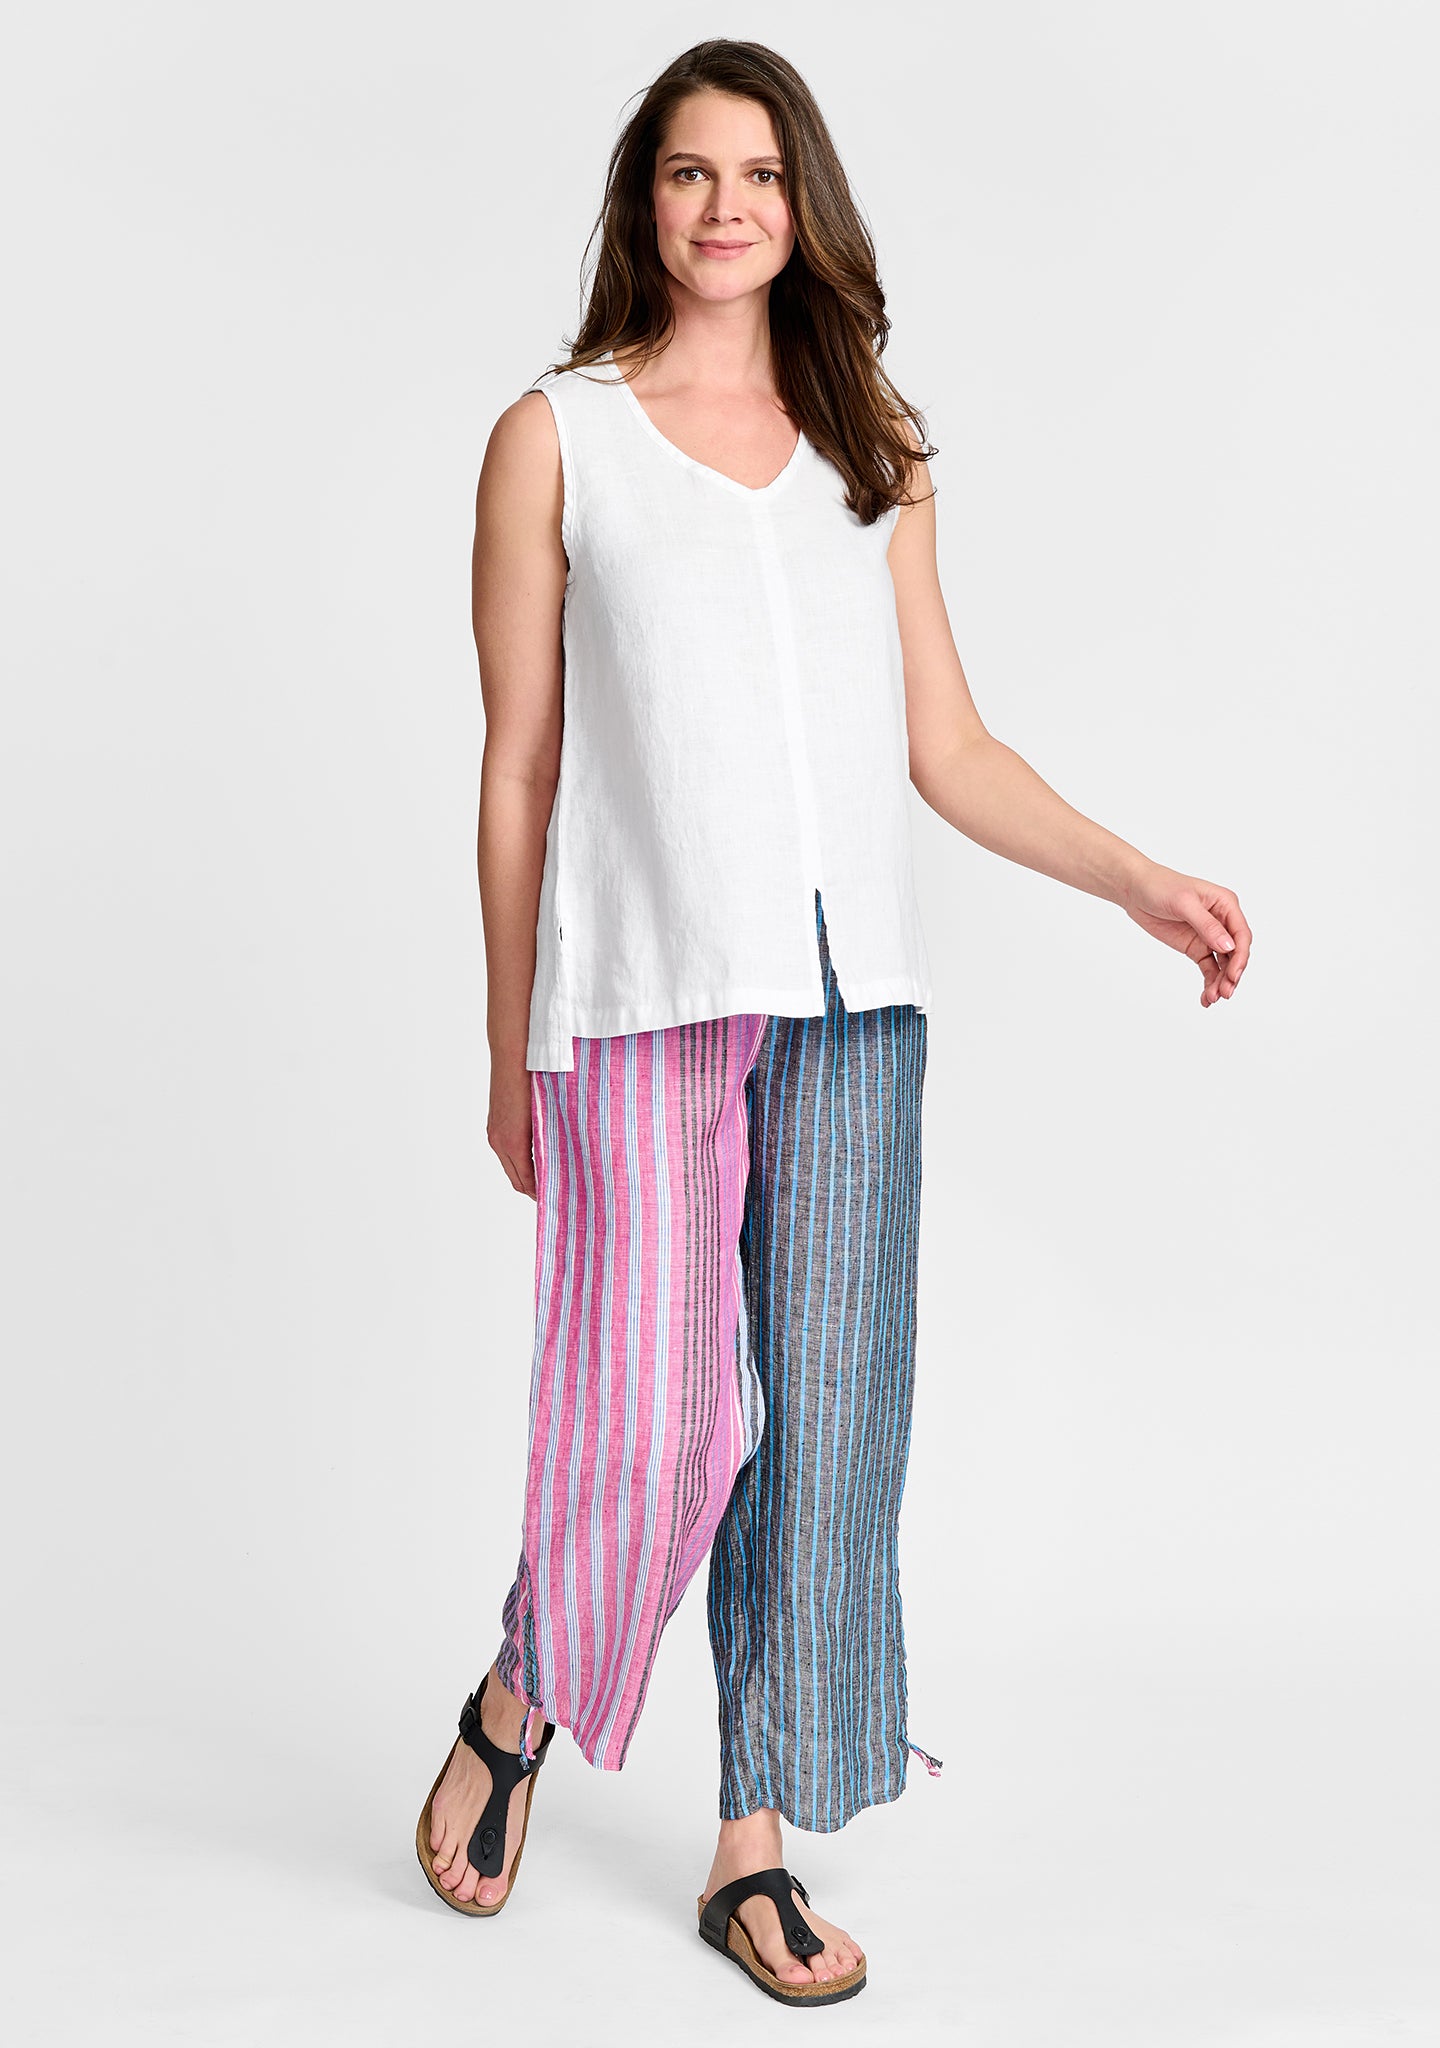 FLAX linen tank in white with linen pants in stripe